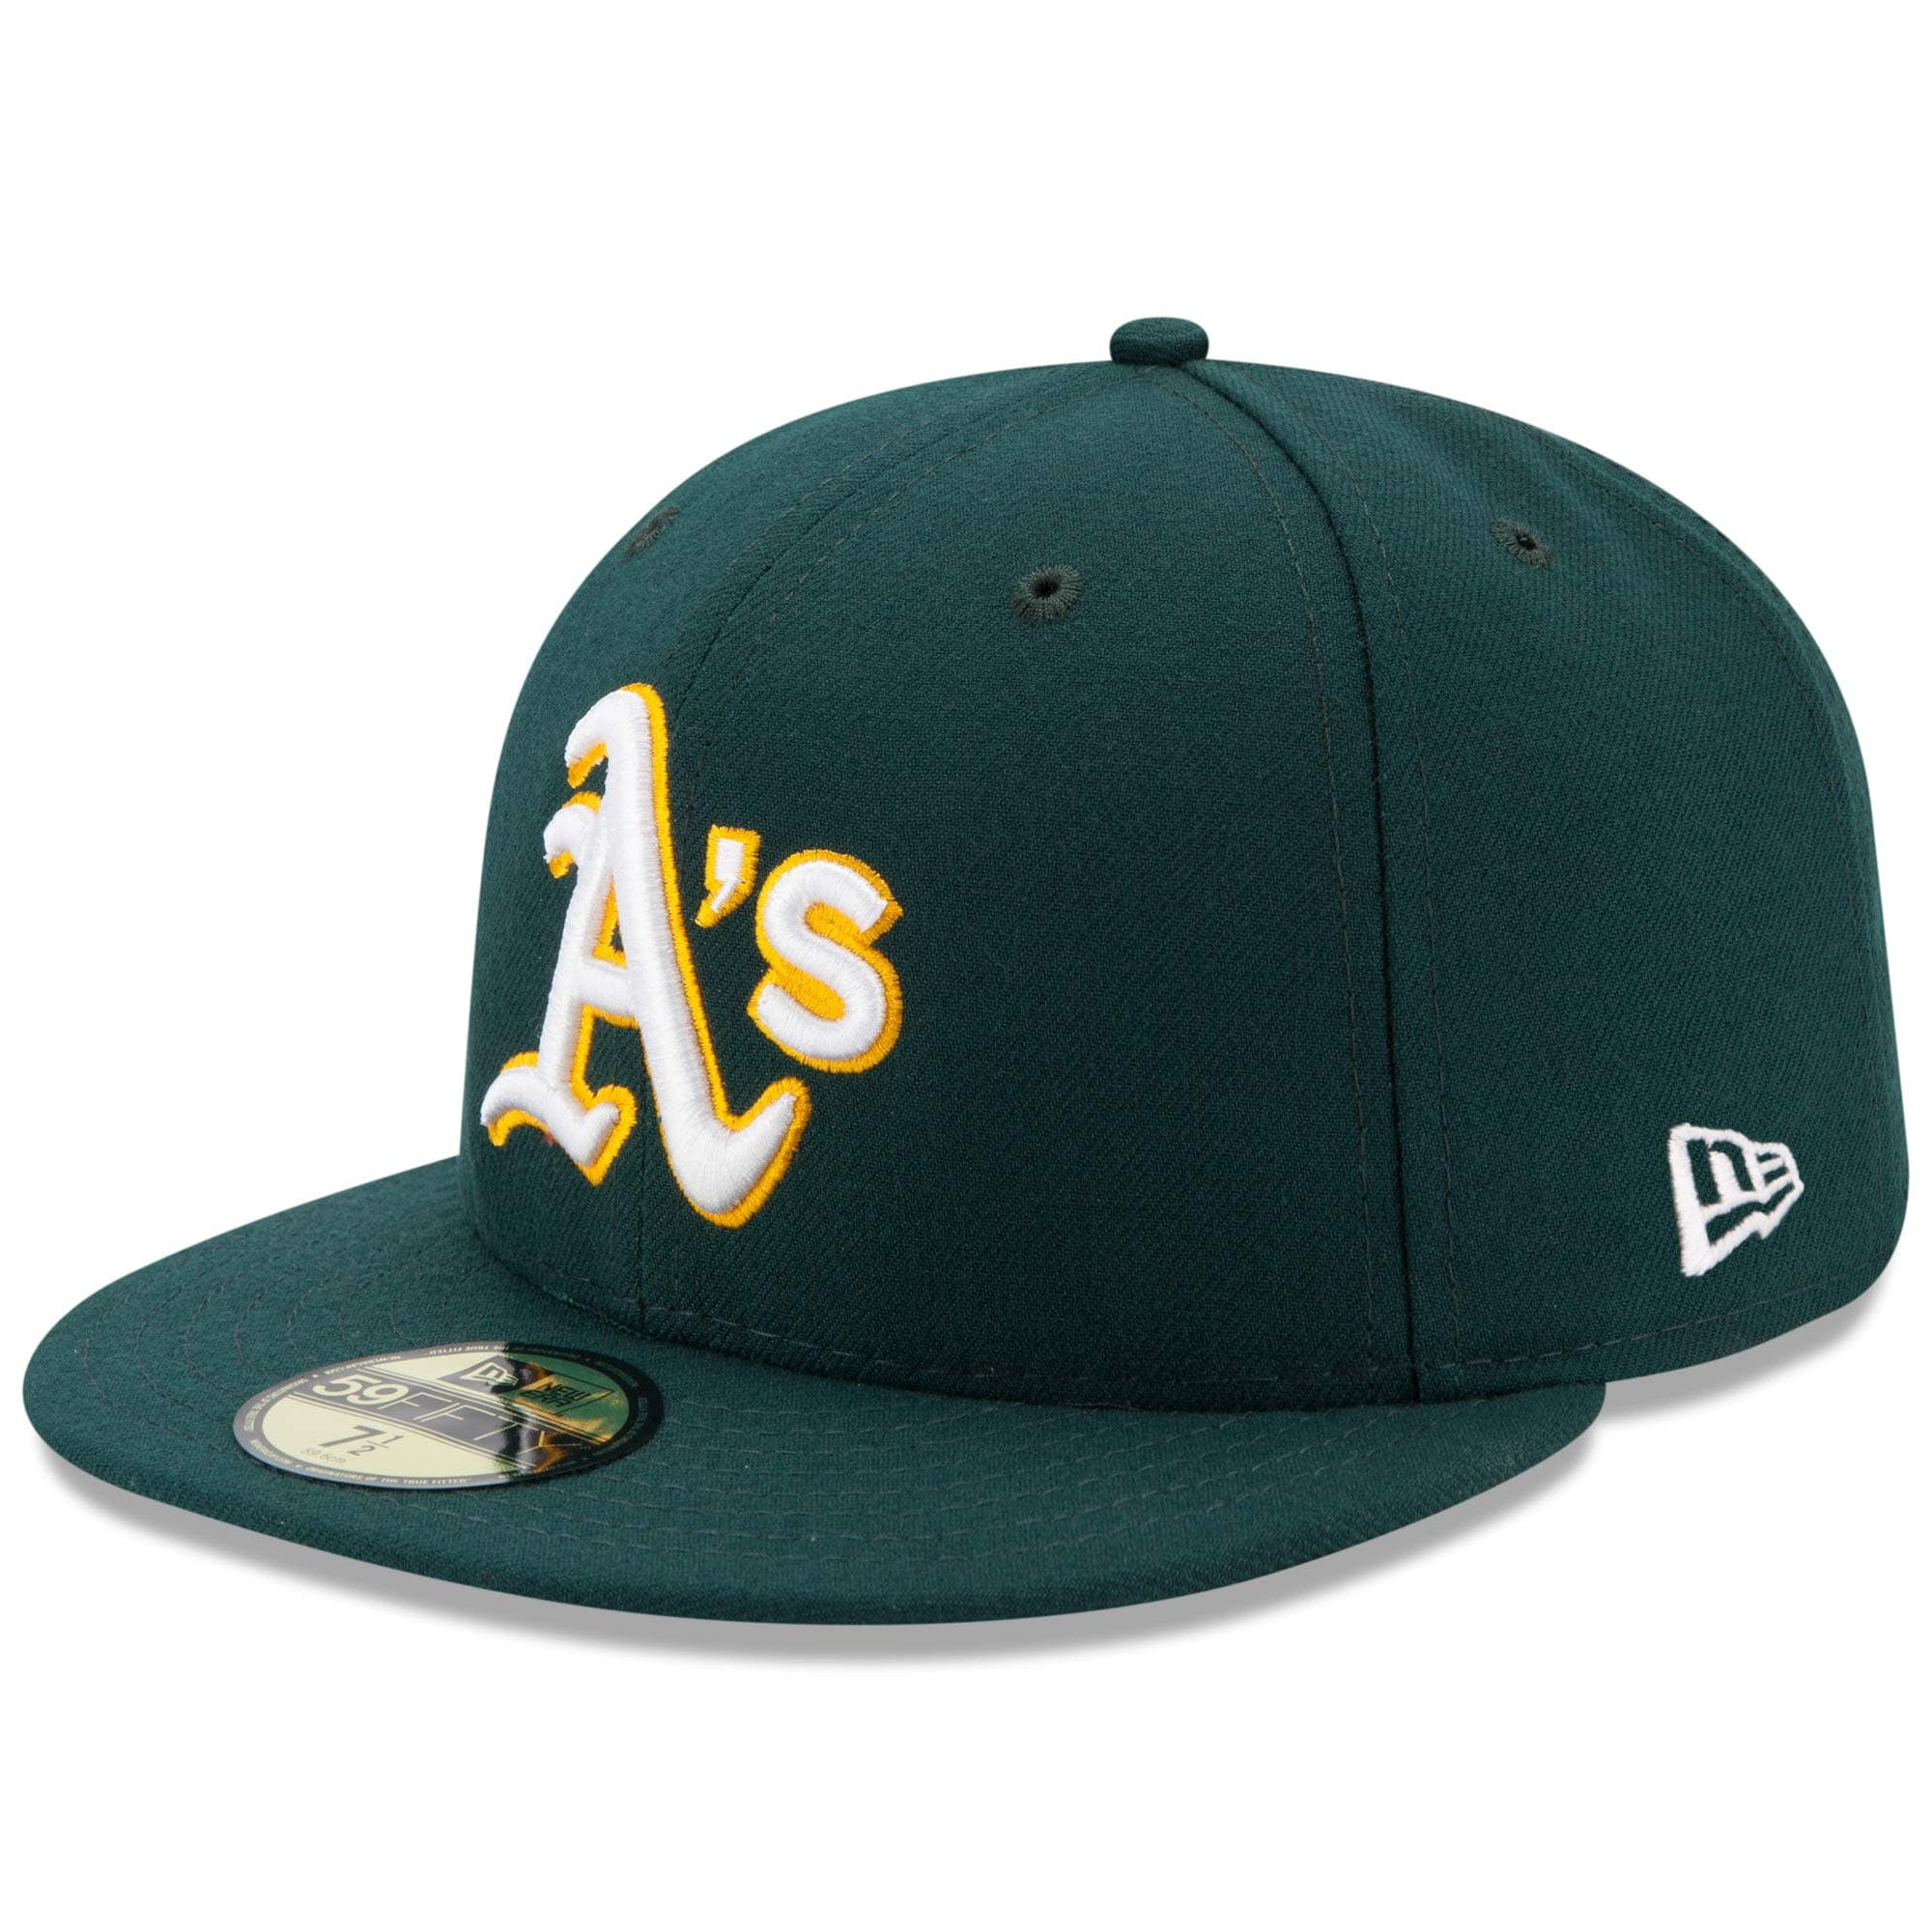 Men's New Era Green Oakland Athletics Road Authentic Collection On